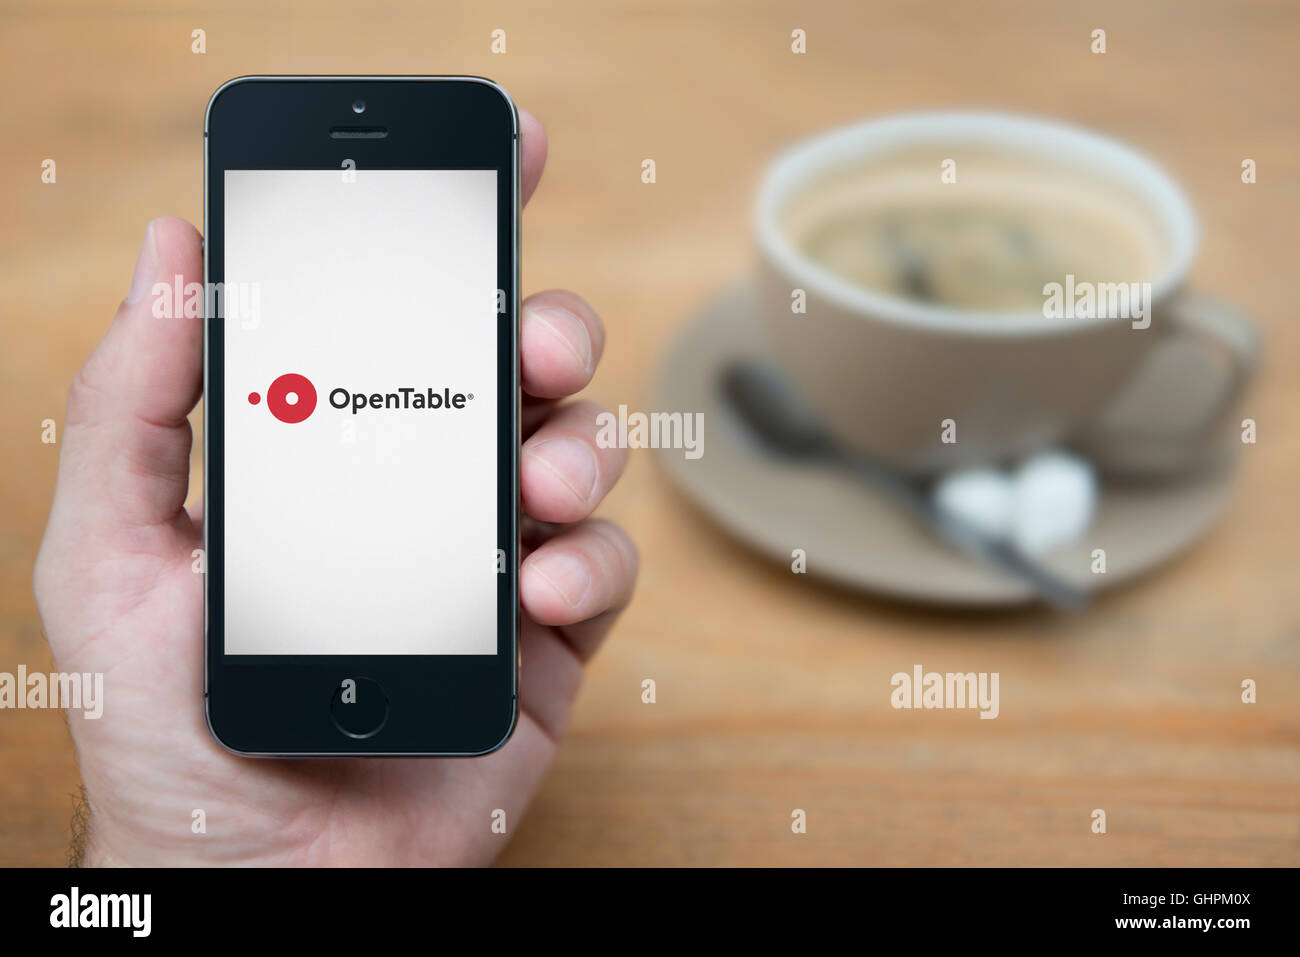 A man looks at his iPhone which displays the Open Table logo, while sat with a cup of coffee (Editorial use only). Stock Photo